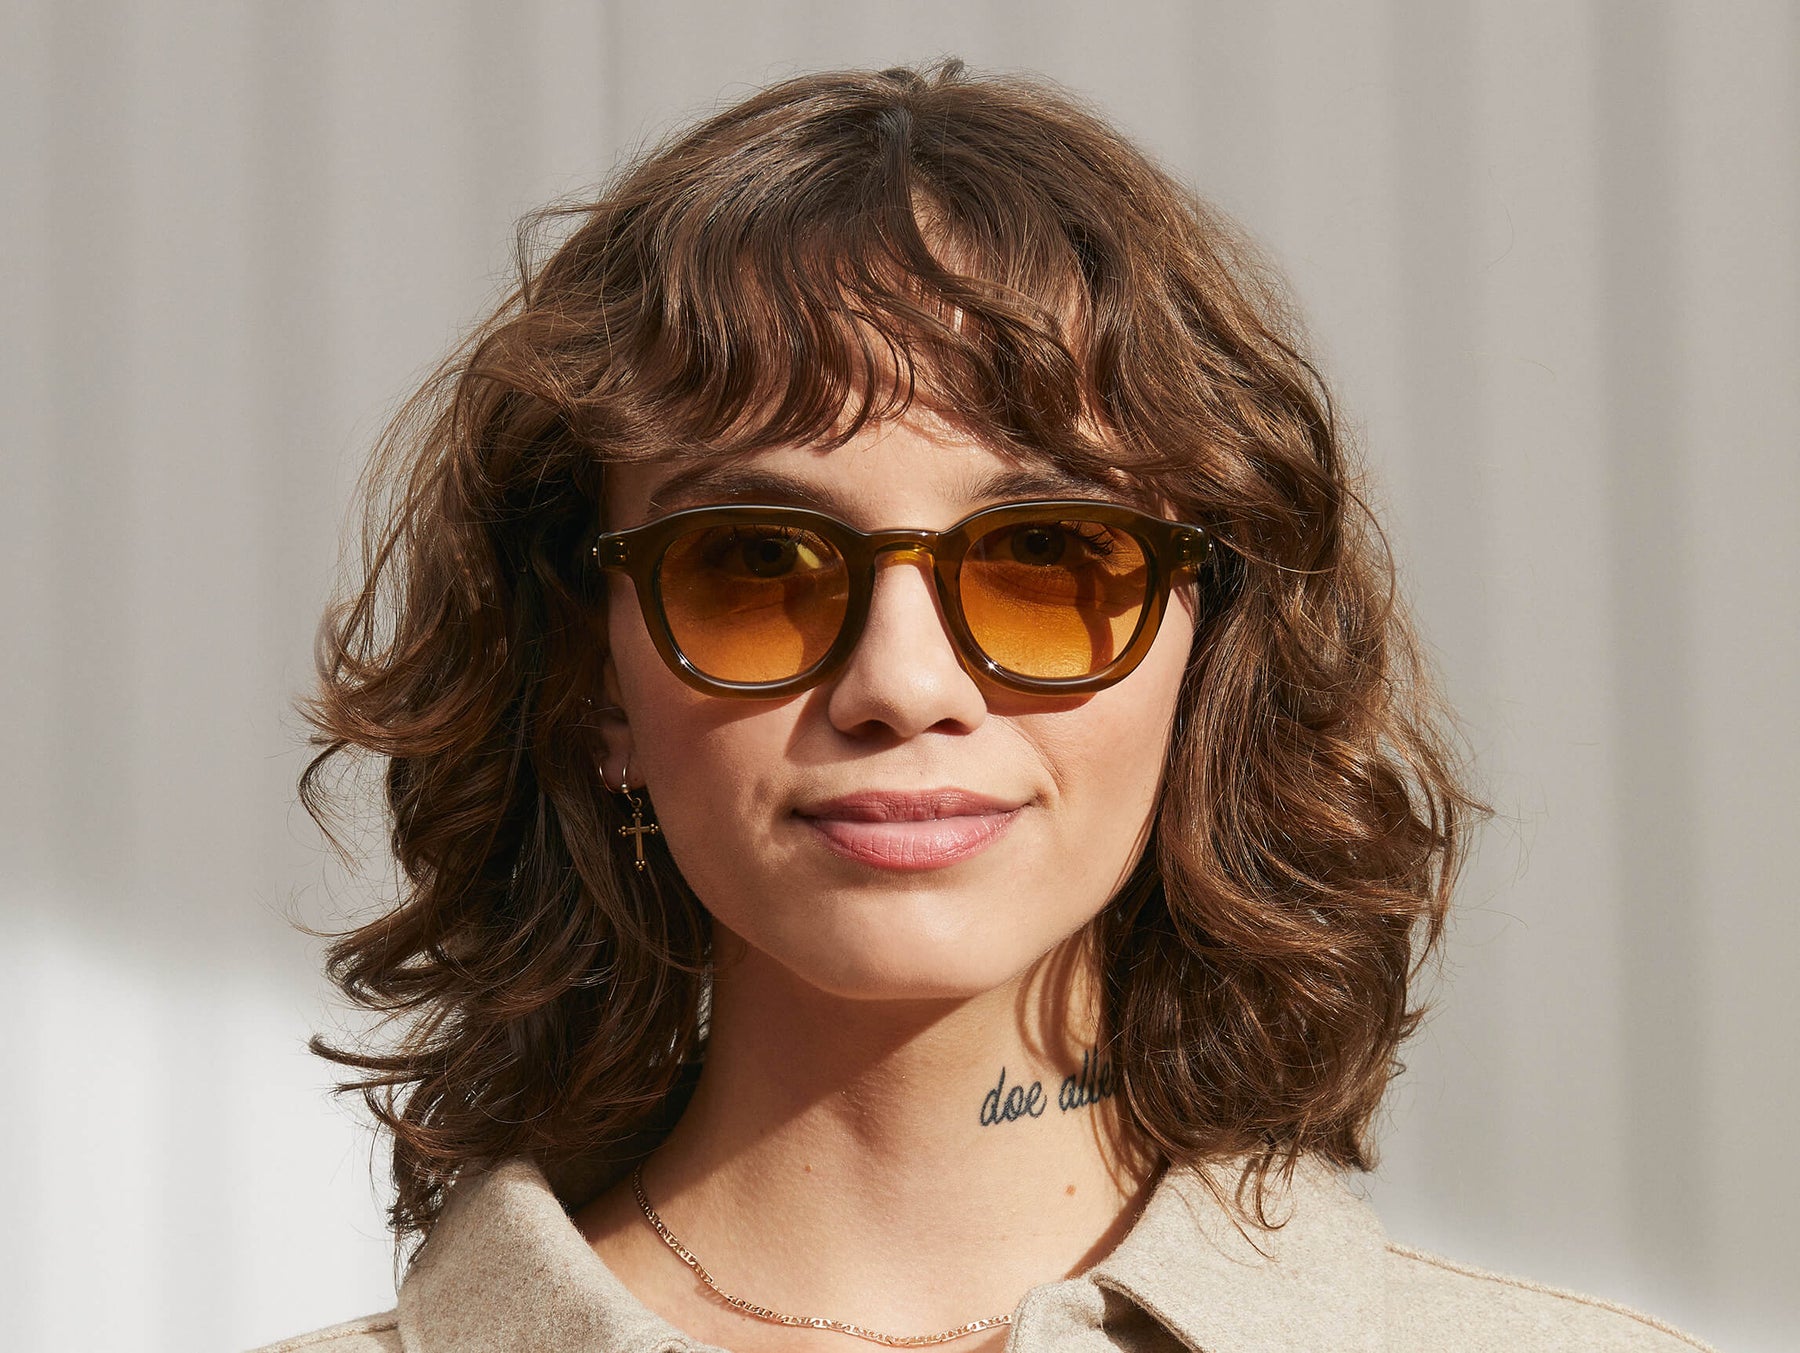 Model is wearing The DAHVEN SUN in Olive Brown in size 44 with Chestnut Fade Tinted Lenses